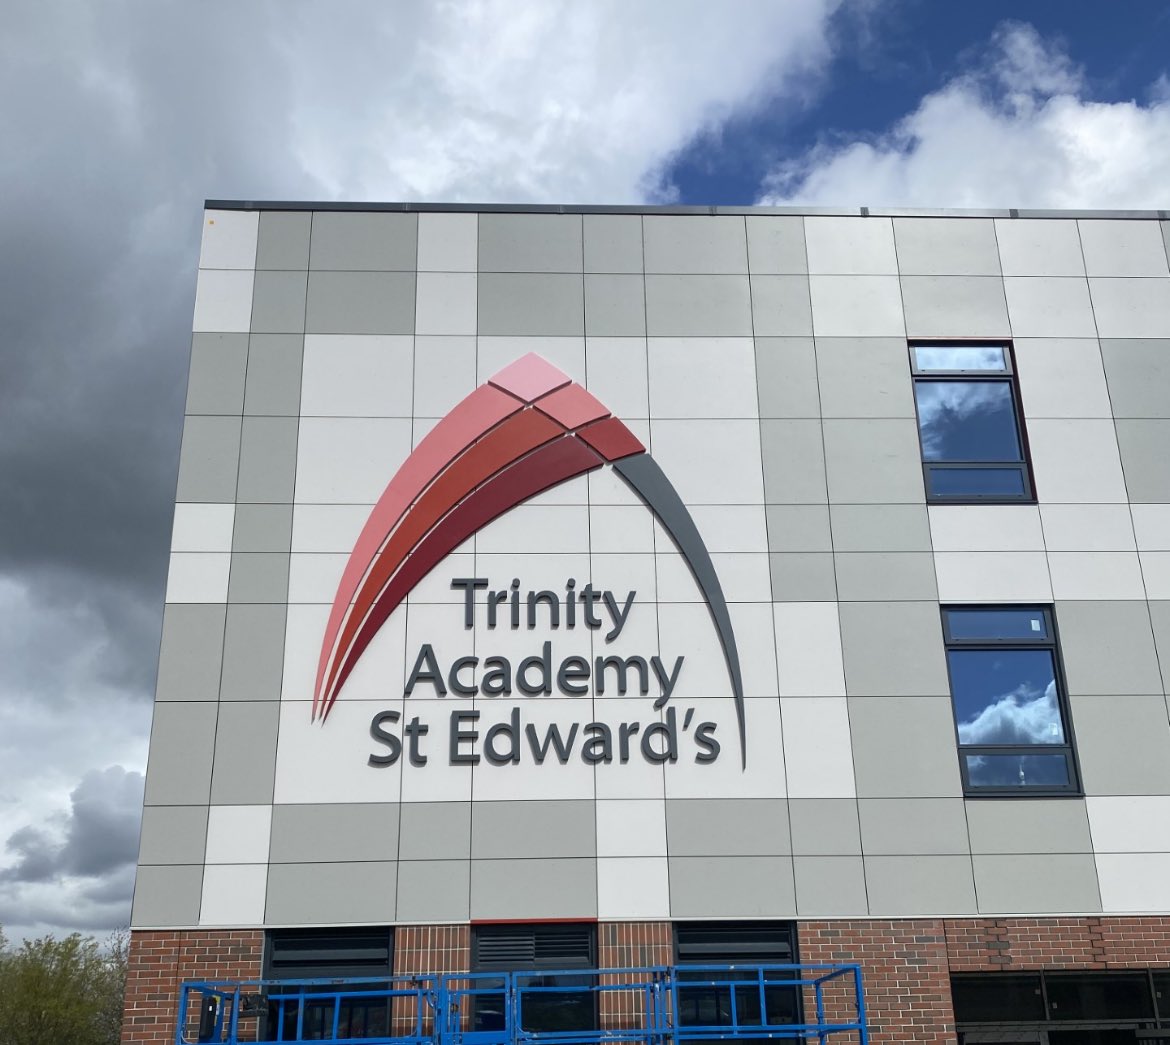 Milestone Achieved ... The sign is up! 🥳 What an exciting moment for #TeamTrinity and the Barnsley community as we take one step closer with our @trinityacadste new build project ☺️🙌